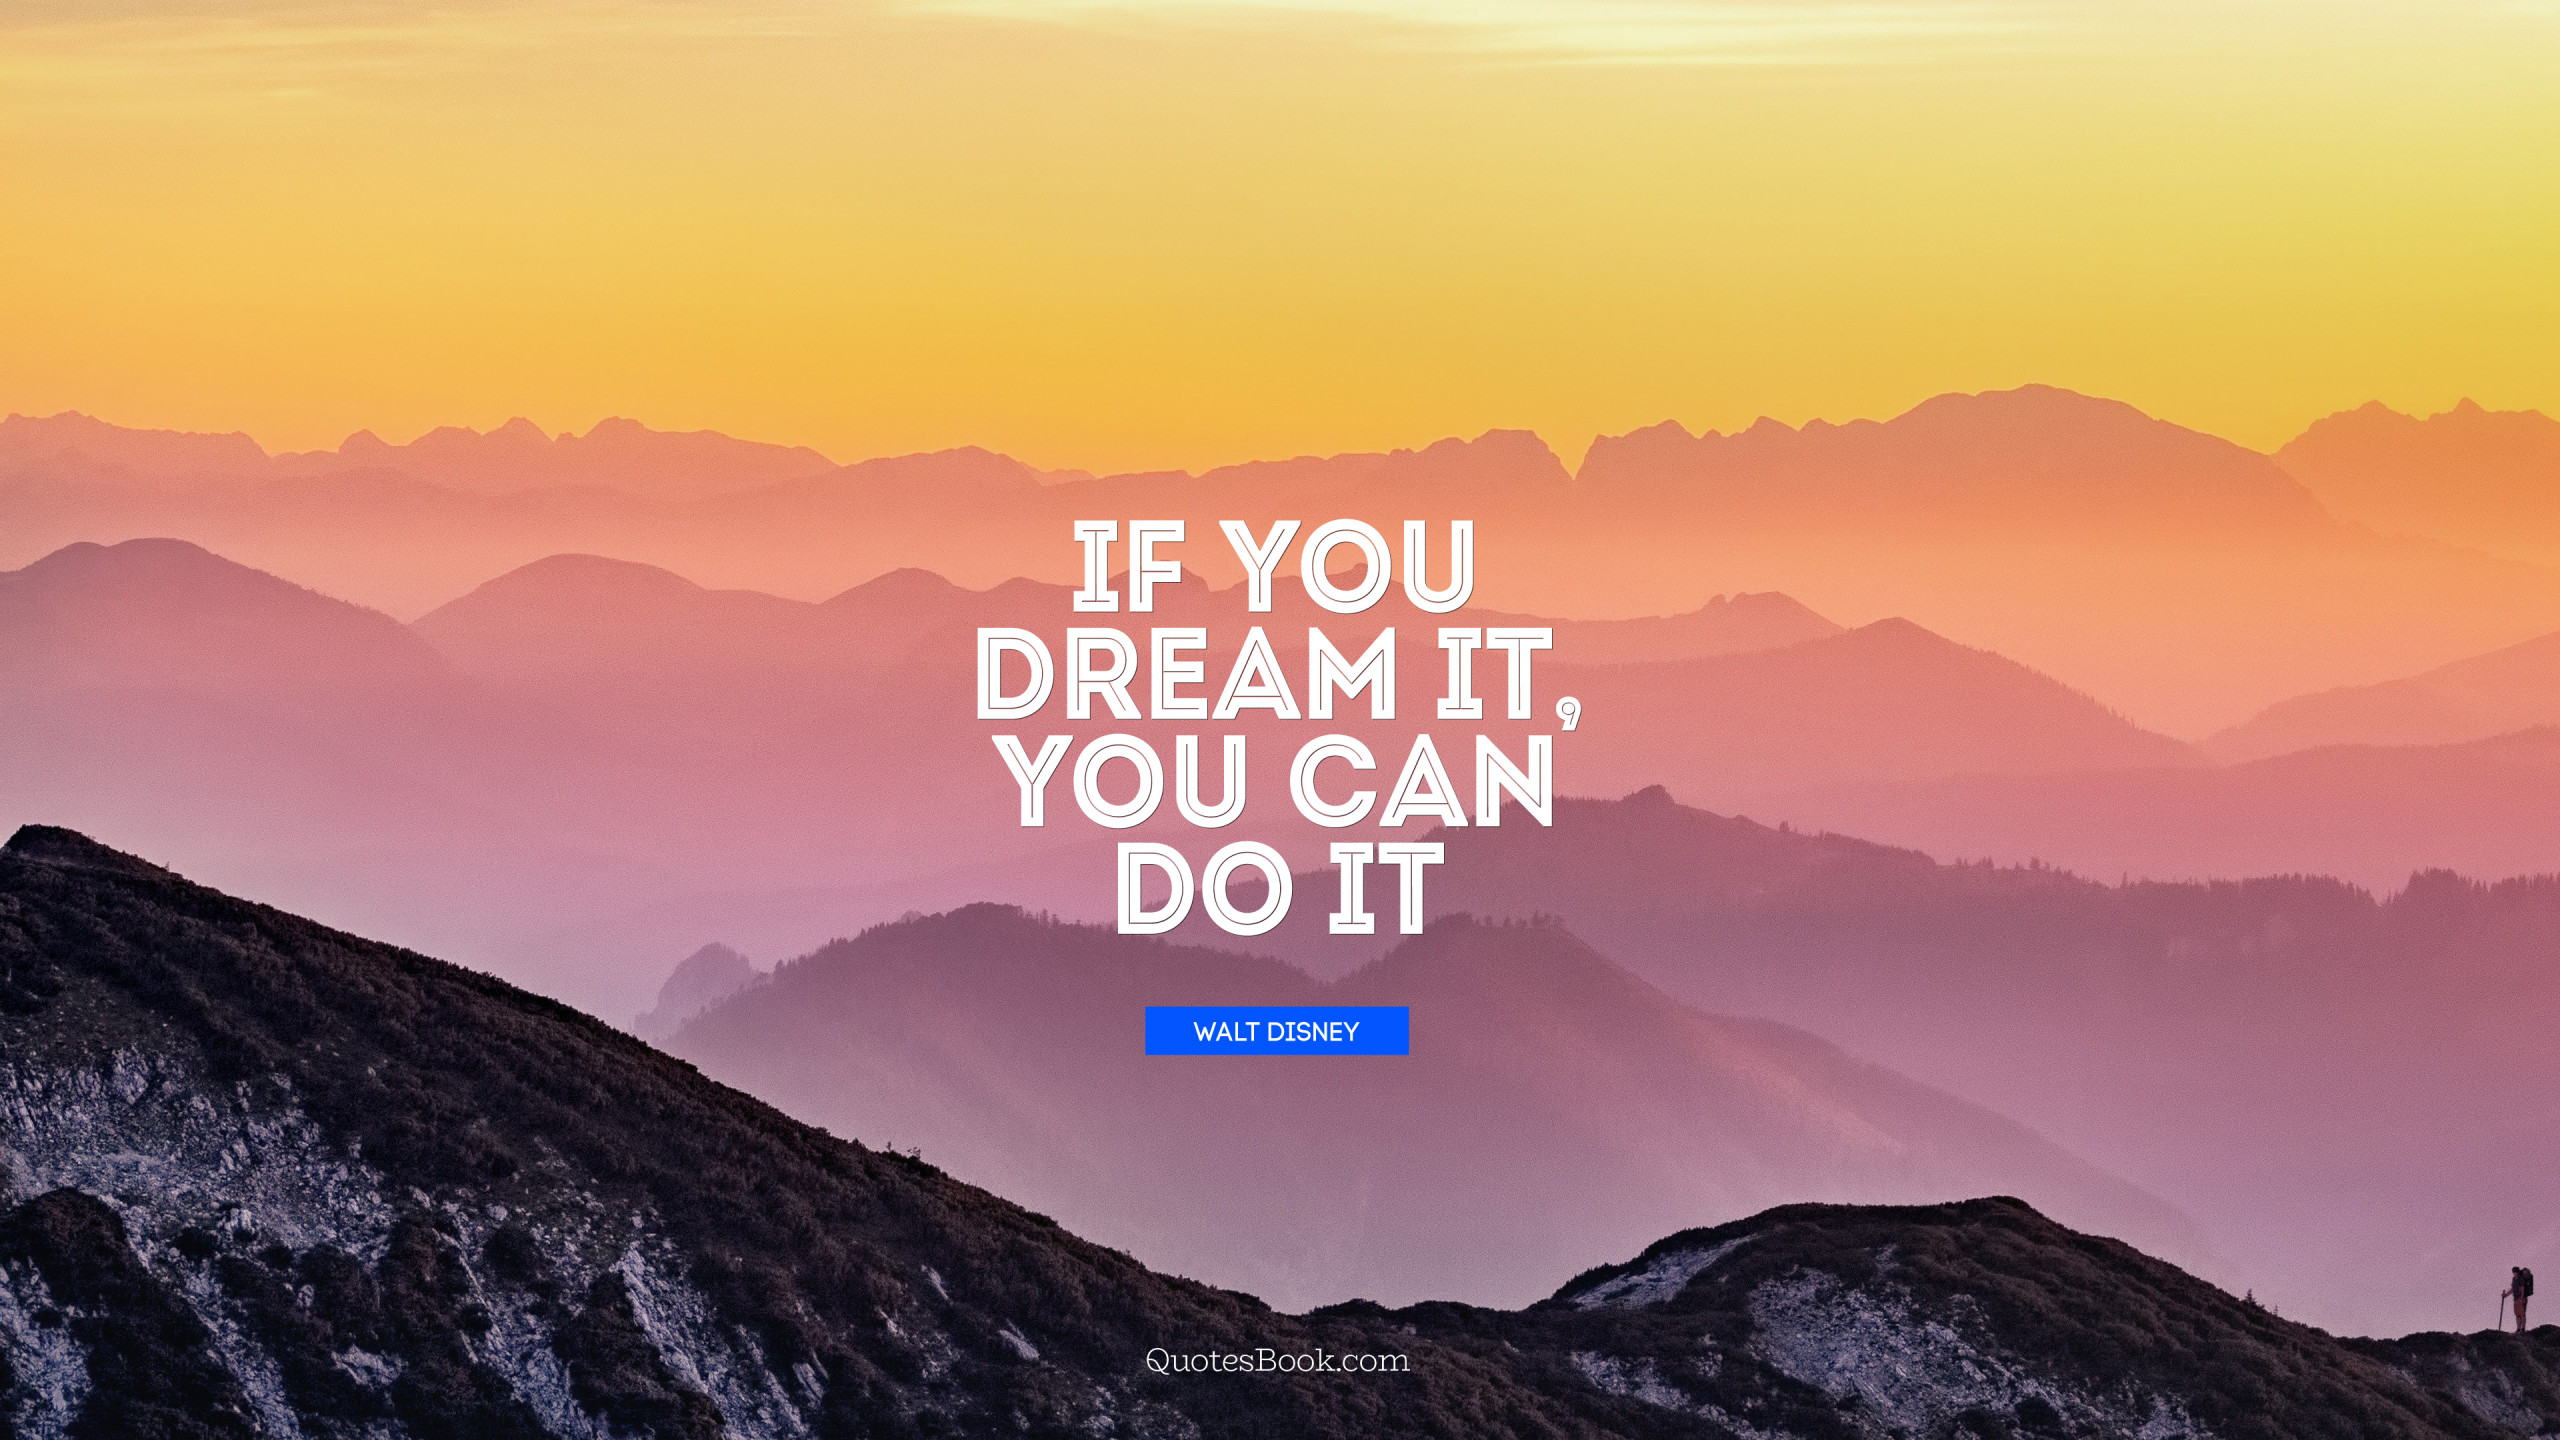 If you dream it, you can do it. - Quote by Walt Disney - QuotesBook